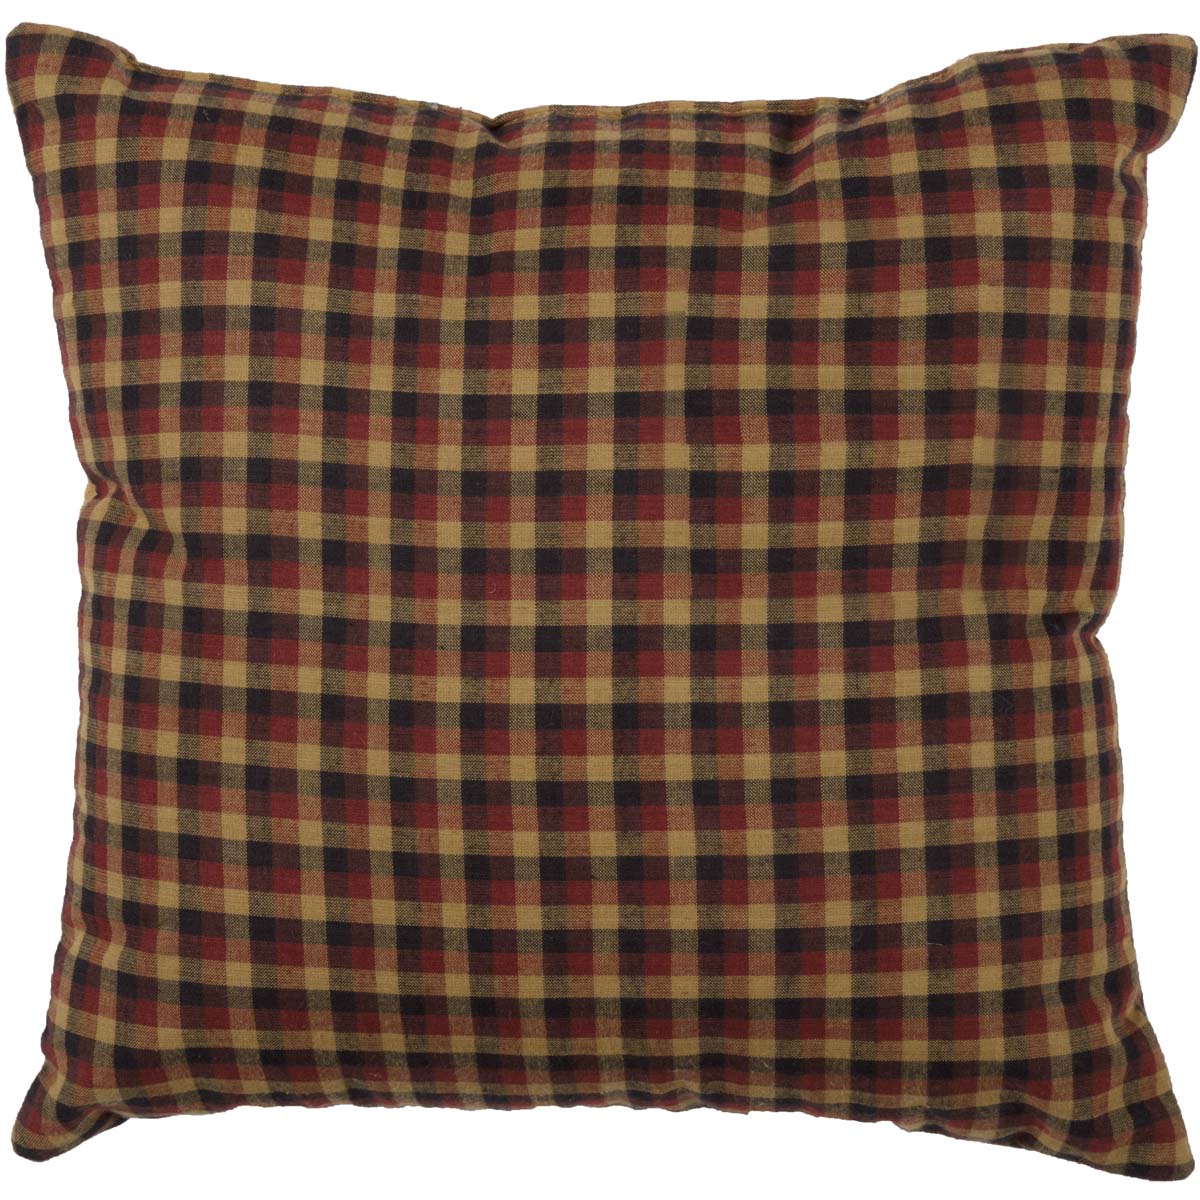 Heritage Farms Hope Pillow 12x12